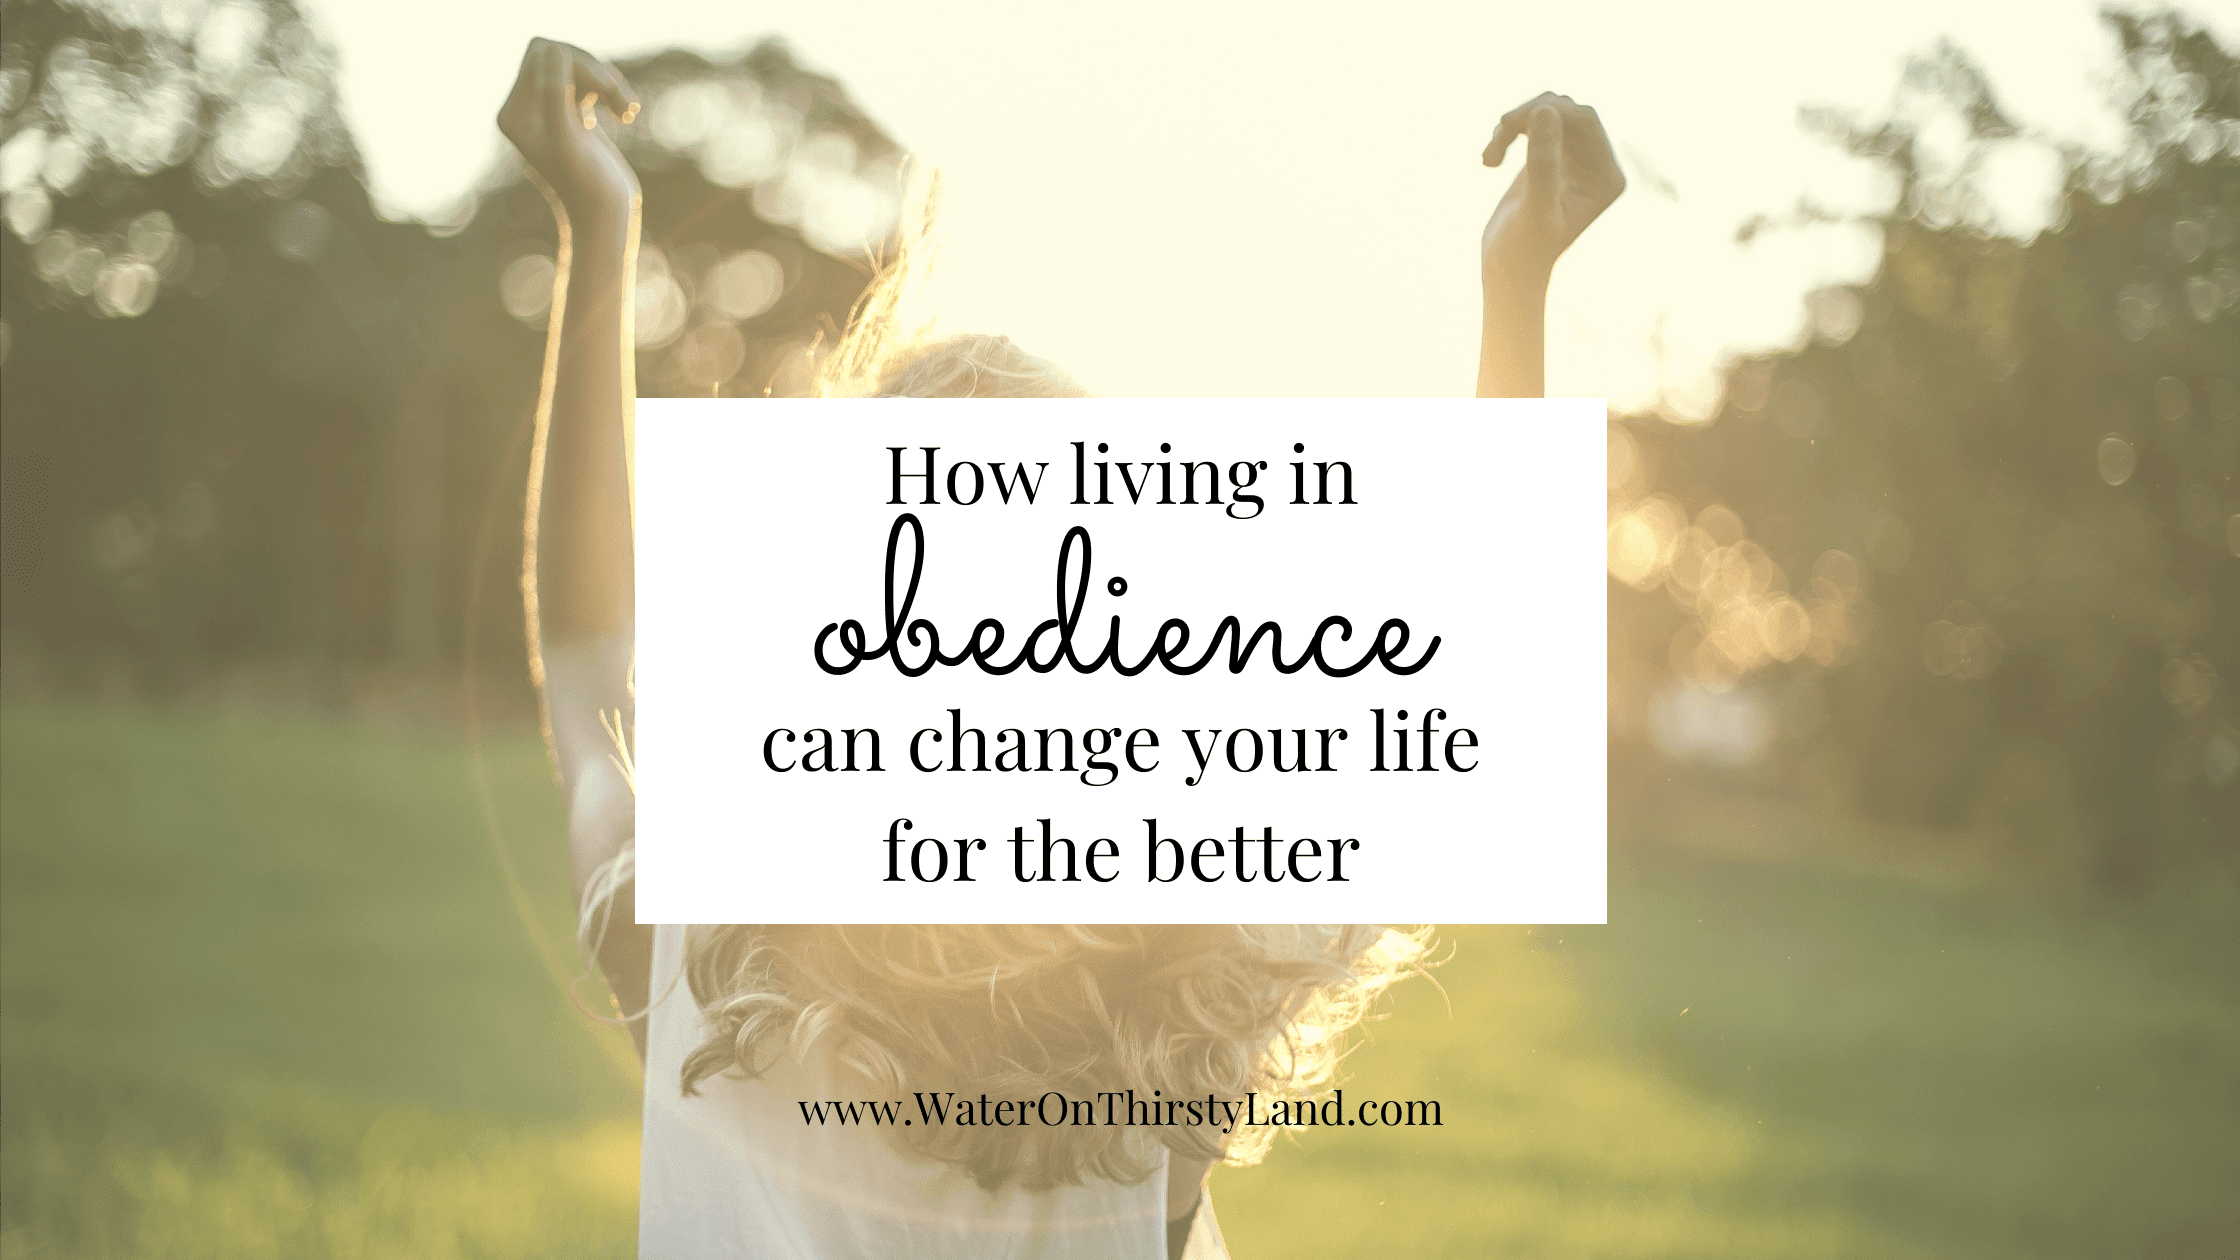 How living in obedience can change your life for the better